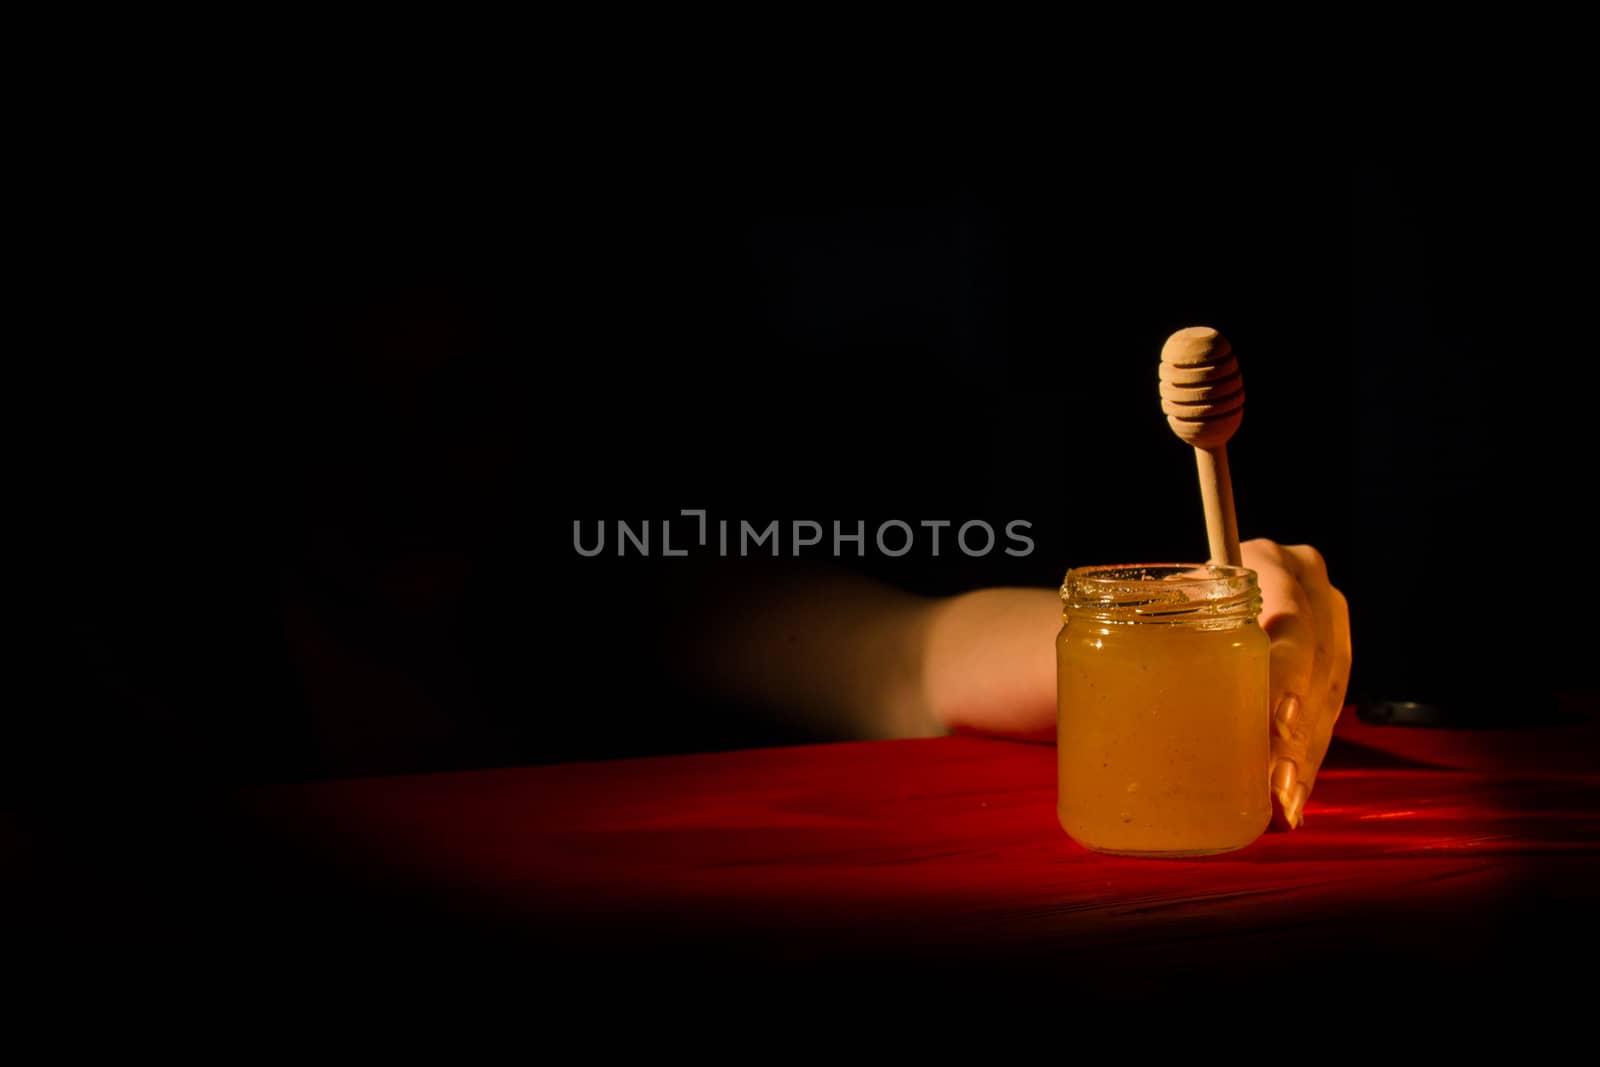 Honey with dipper on red wooden background with the the play of light and shadow